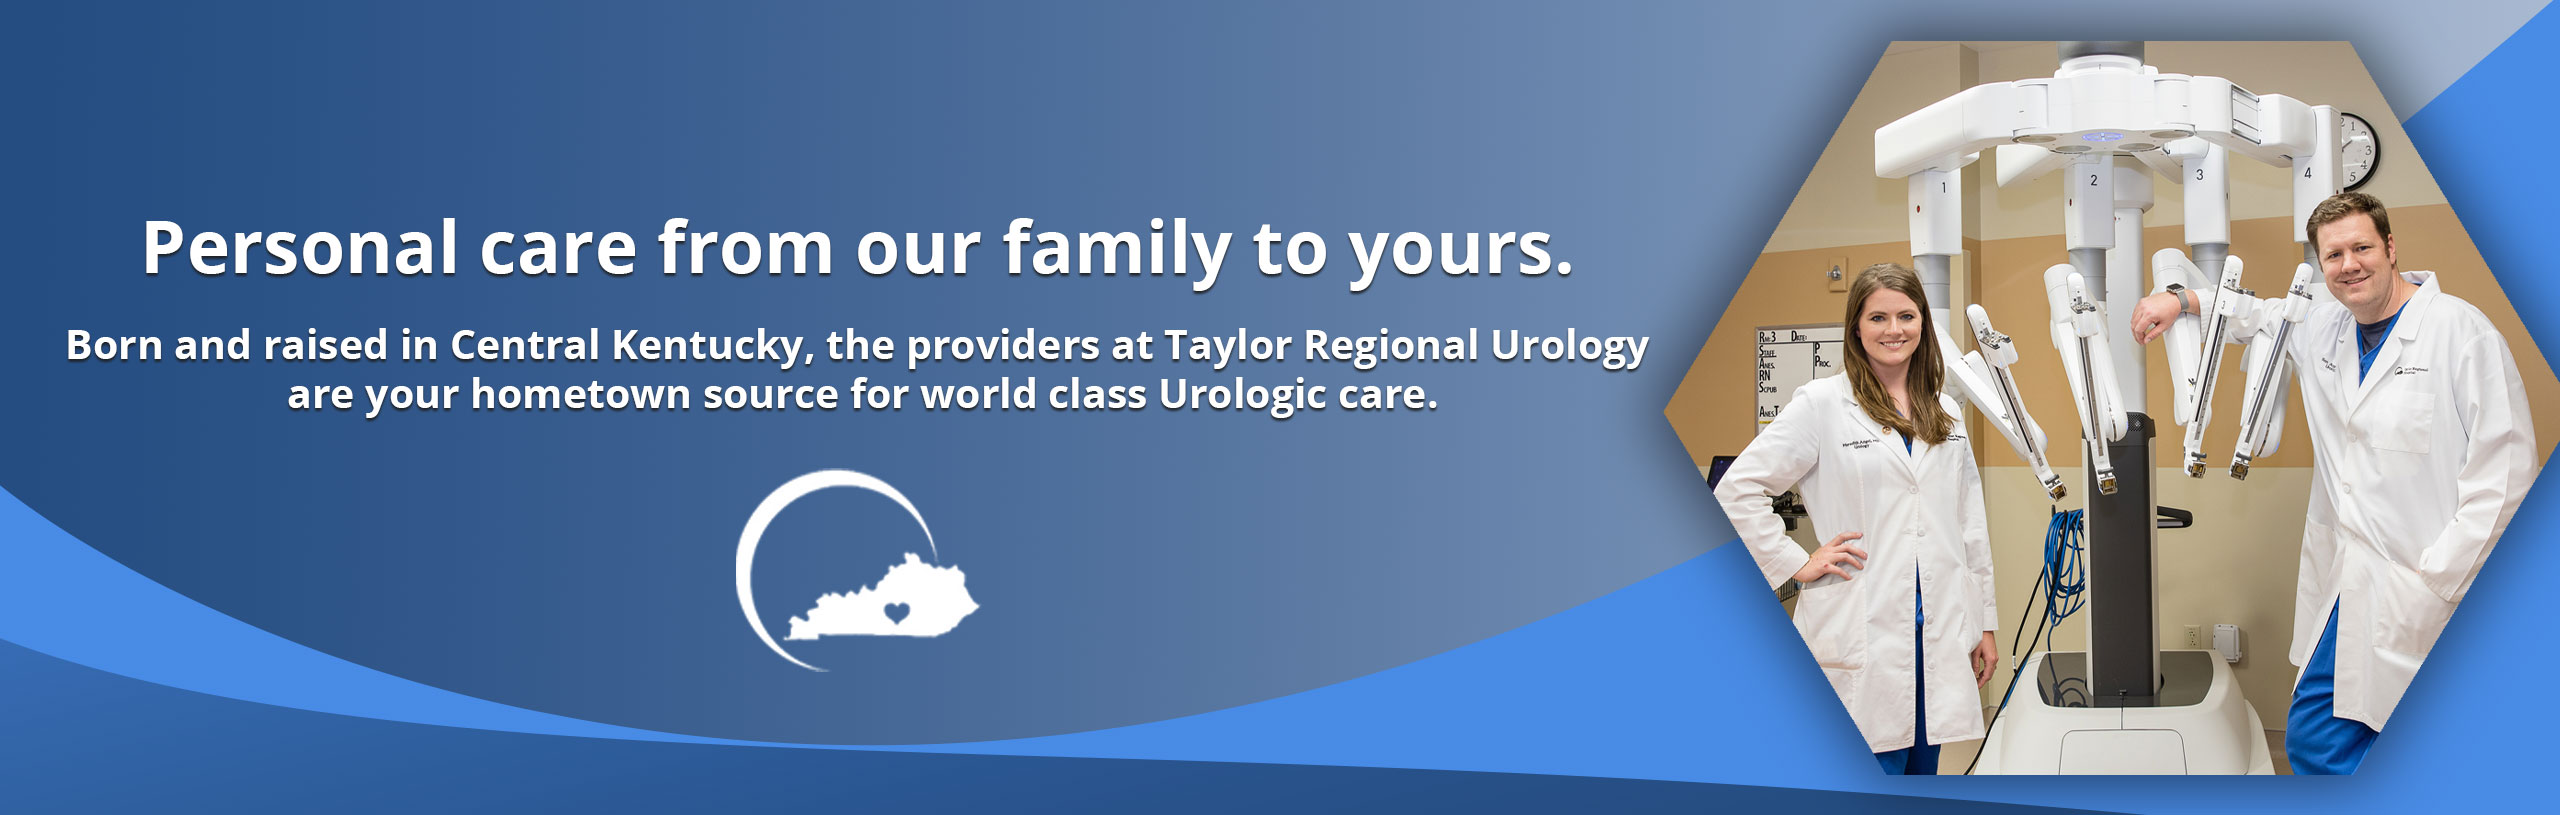 Personal care from our family to yours. 
Born and raised in Central Kentucky, the providers at Taylor Regional Urology are your hometown source for world class Urologic care.